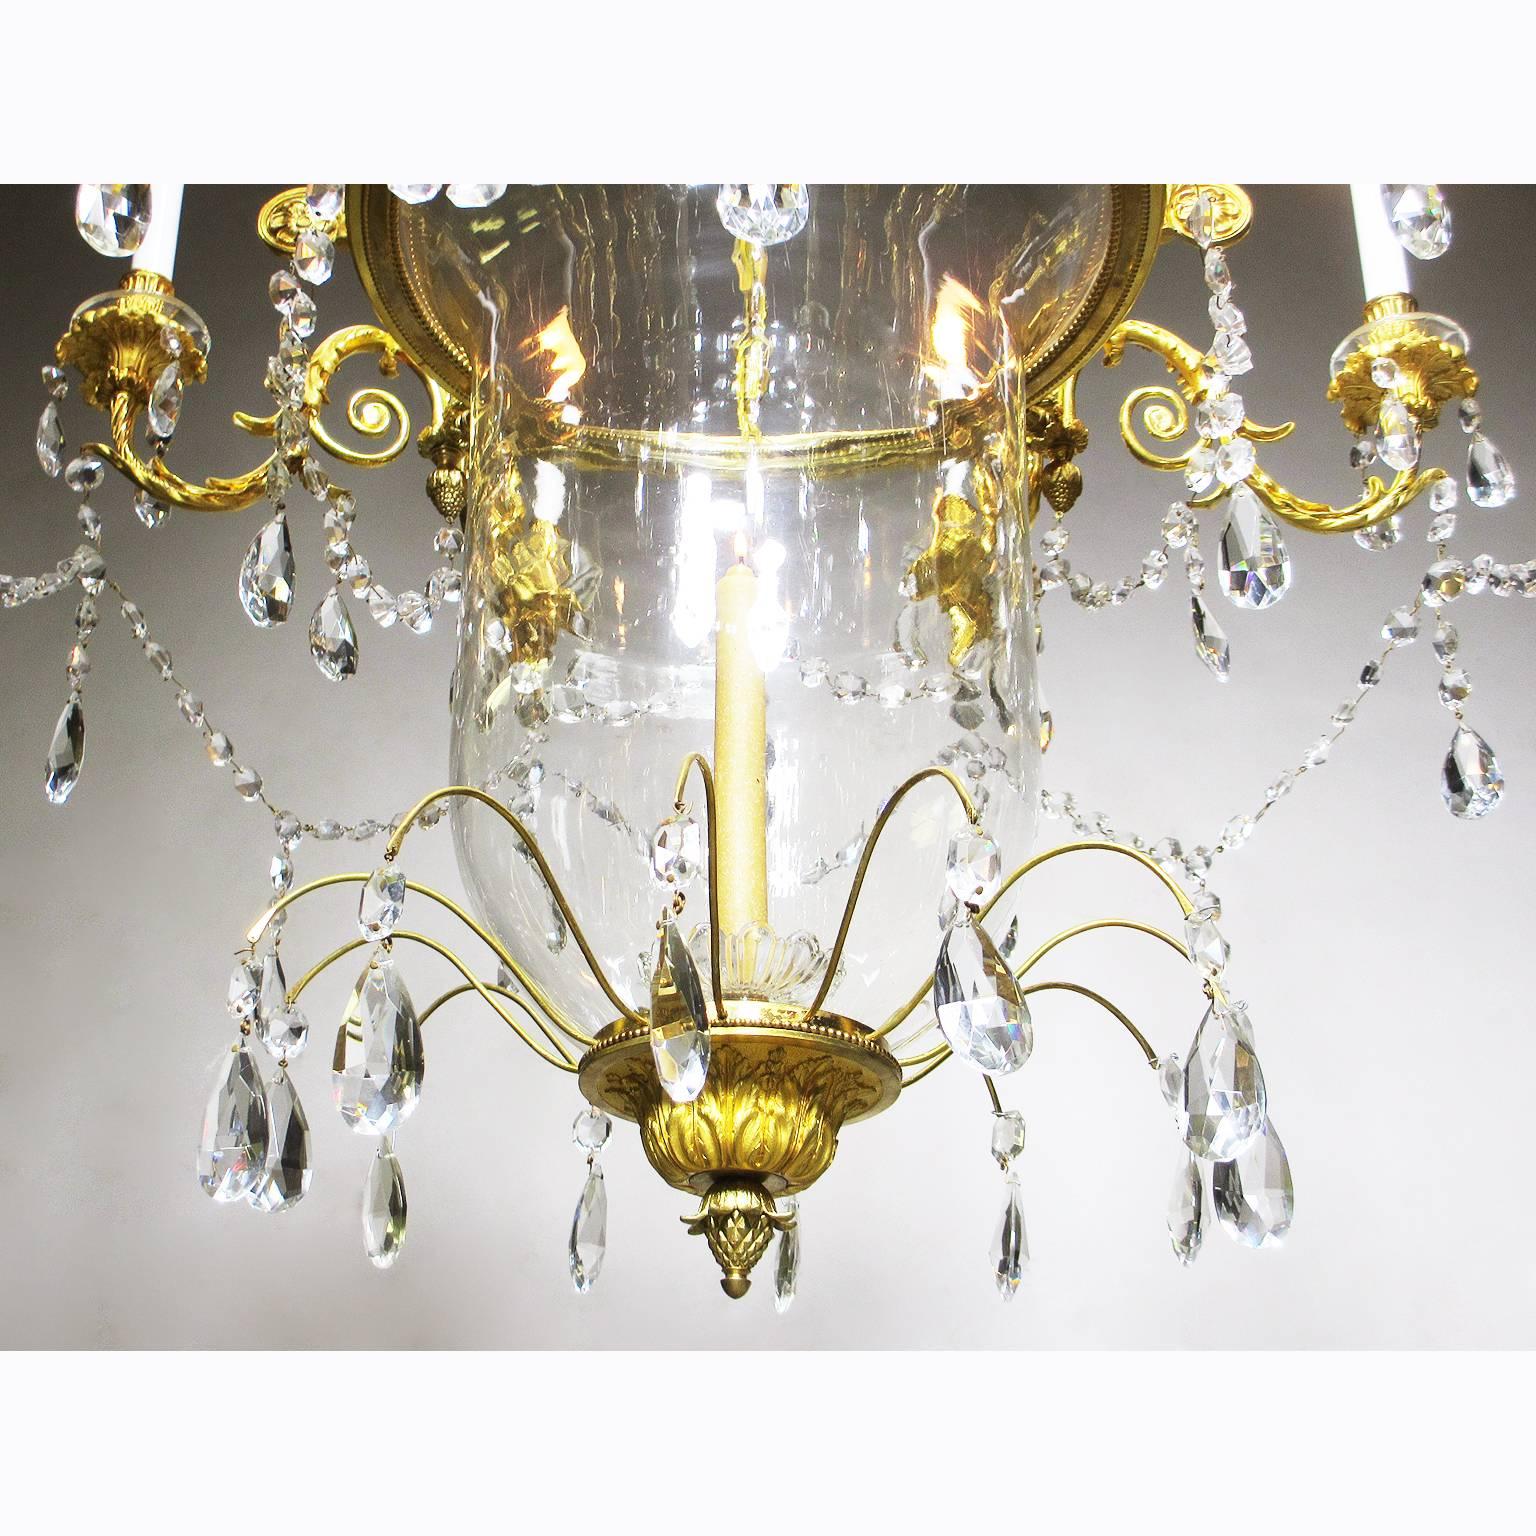 A very fine and rare French 19th century Louis XV style ormolu-mounted and cut-glass eight-light chandelier with a suspended bell-shaped blown-glass candle-bowl, by Mottheau et Fils, Paris. The circular finely chased gilt bronze frame, in satin and